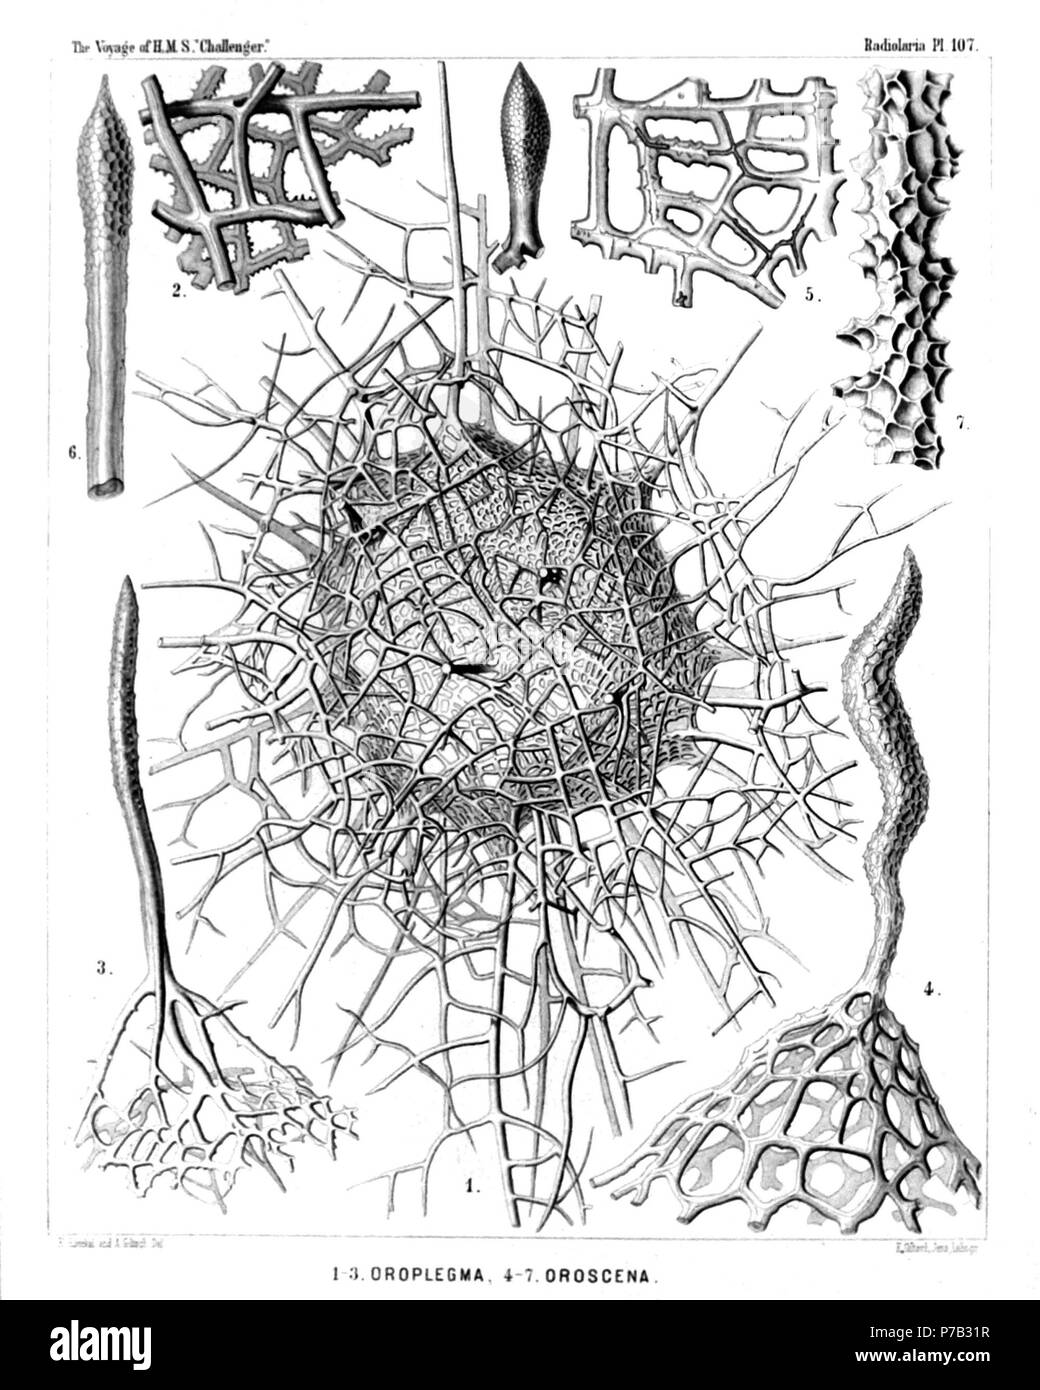 English: Illustration from Report on the Radiolaria collected by H.M.S. Challenger during the years 1873-1876. Part III. Original description follows:  Plate 107. Orosphærida.  Diam.  (Fig. 8 of this Plate has no number, by mistake; it is at the top in the middle.)  Fig. 1. Oroplegma diplosphæra, n. sp., × 50  The entire shell, enveloped by an outer mantle of spongy framework.  Fig. 2. Oroplegma giganteum, n. sp., × 200  A small piece of the spongy framework.  Fig. 3. Oroplegma spongiosum, n. sp., × 50  A pyramidal elevation of the inner shell, with its spongy framework, and a radial spine on  Stock Photo